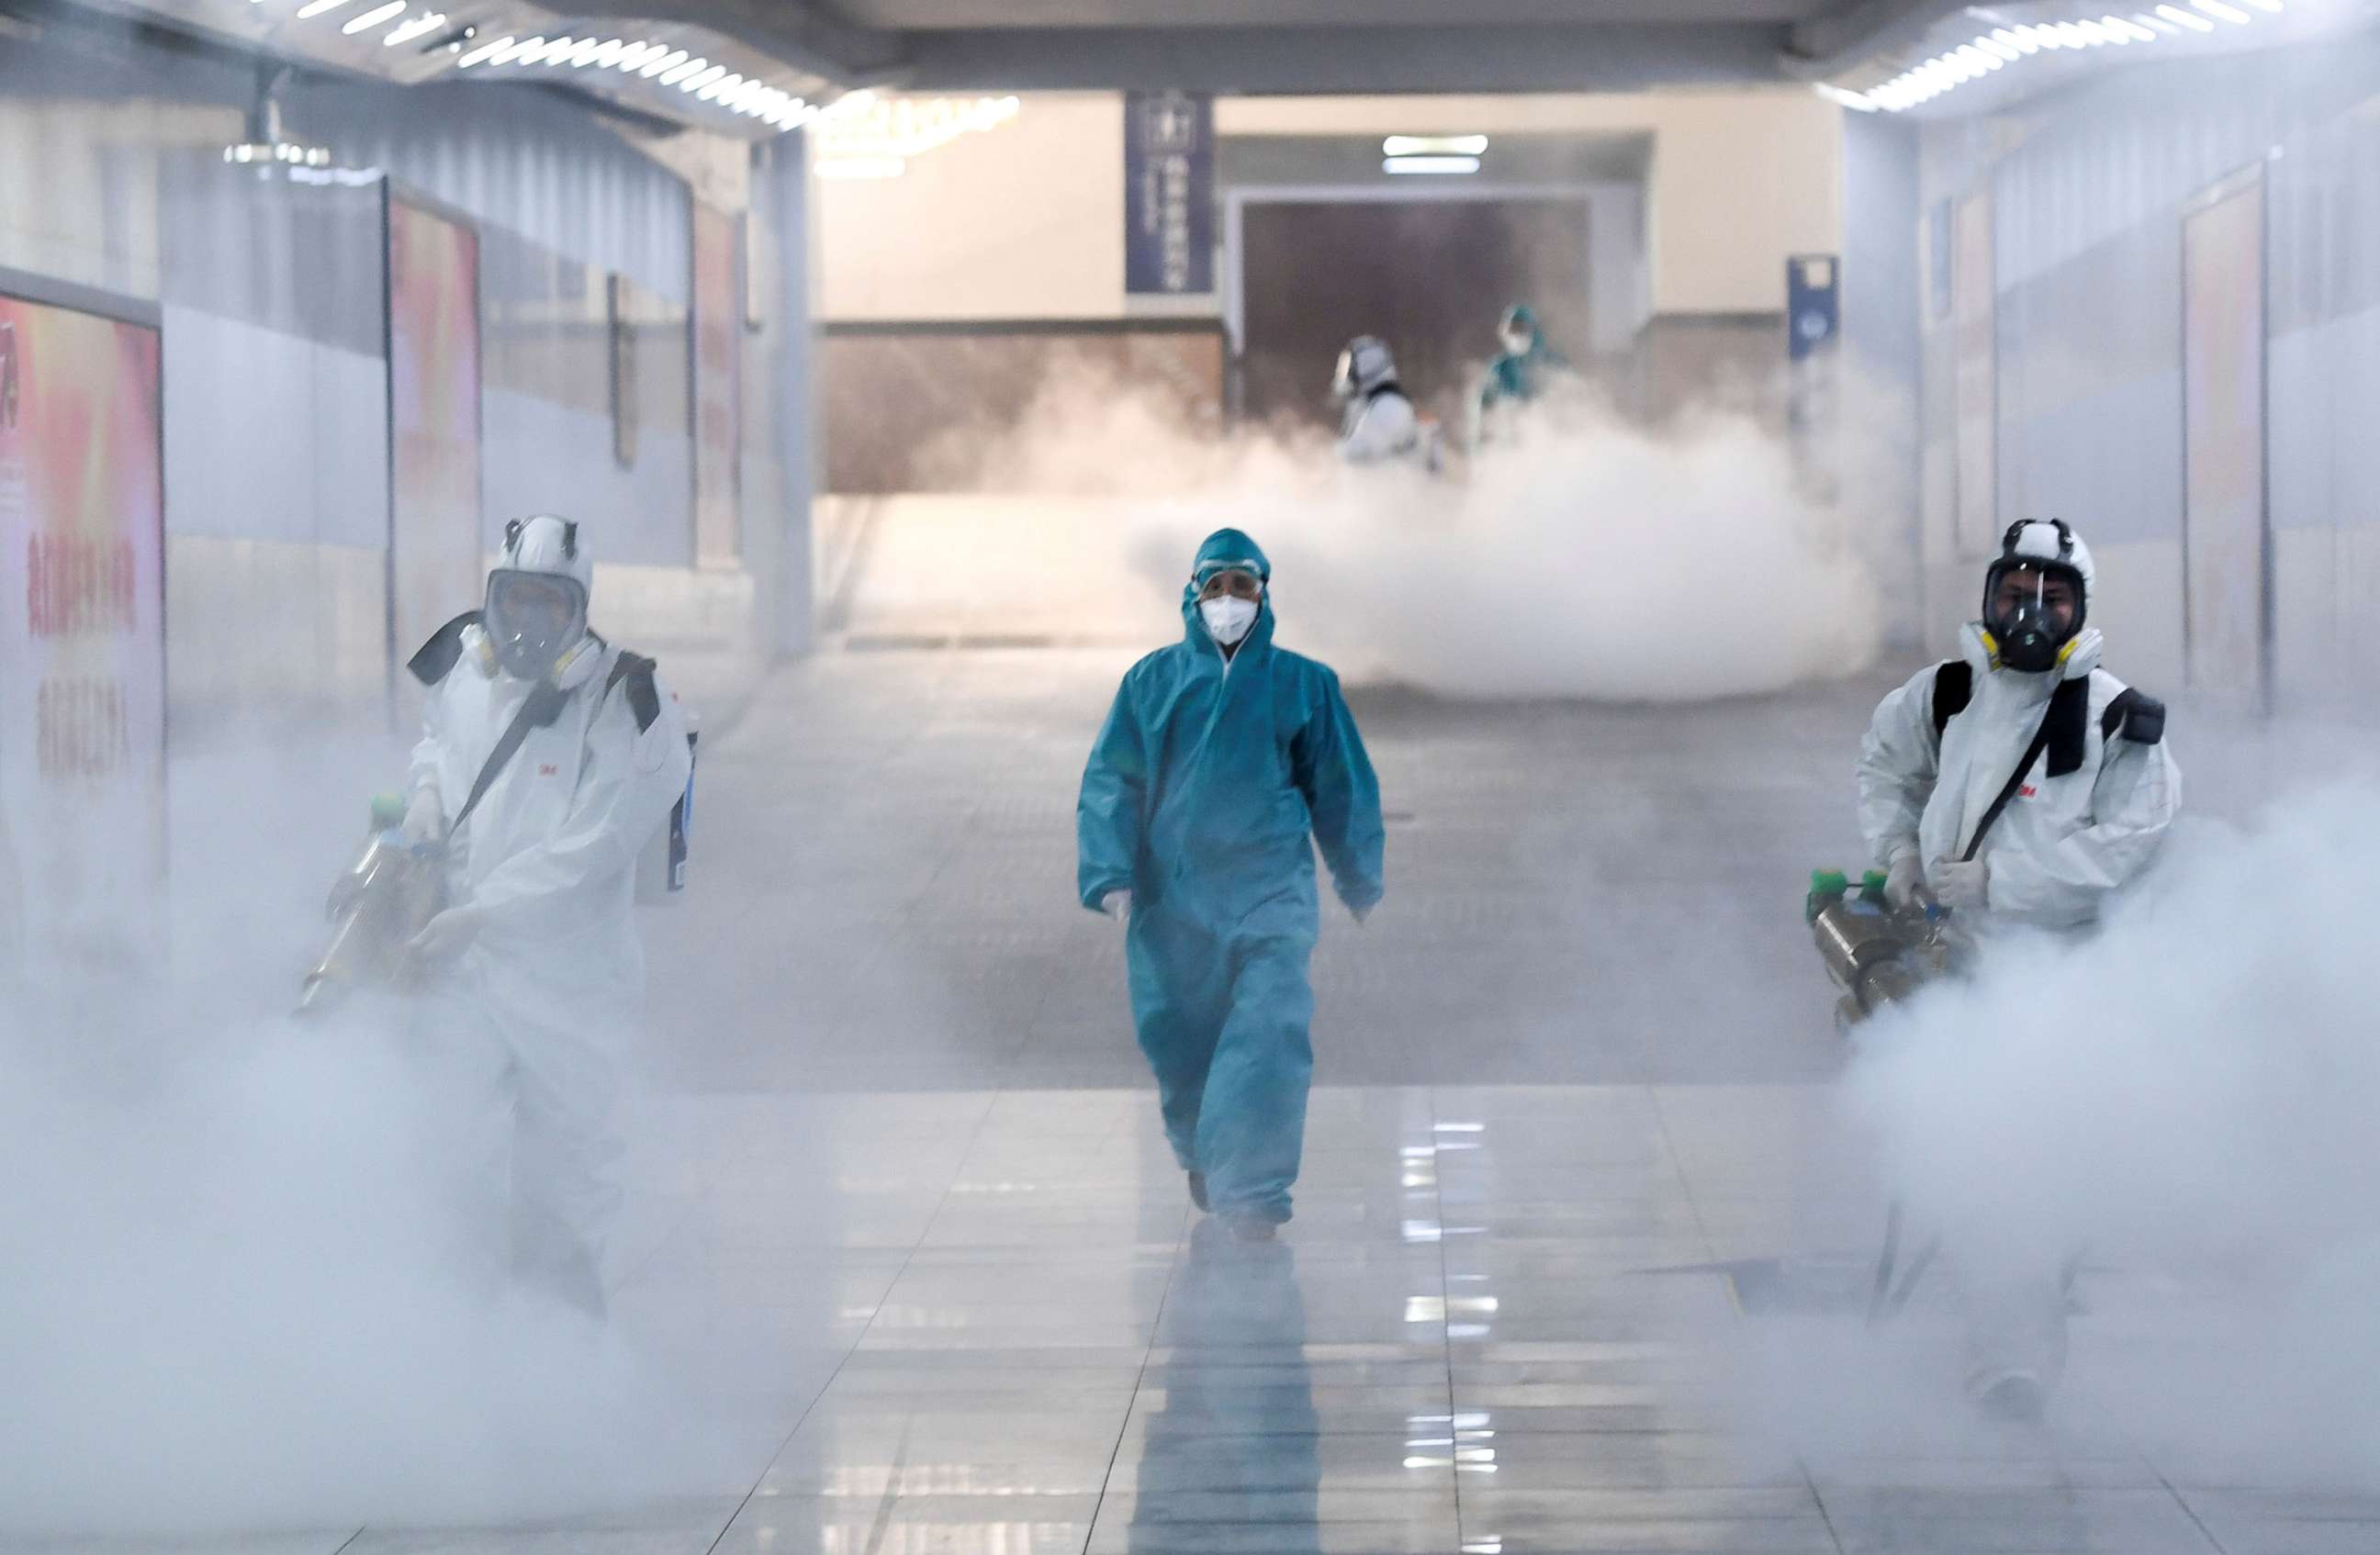 PHOTO: Volunteers in protective suits disinfect a railway station as the country is hit by an outbreak of the new coronavirus, in Changsha, Hunan province, China, Feb. 4, 2020.